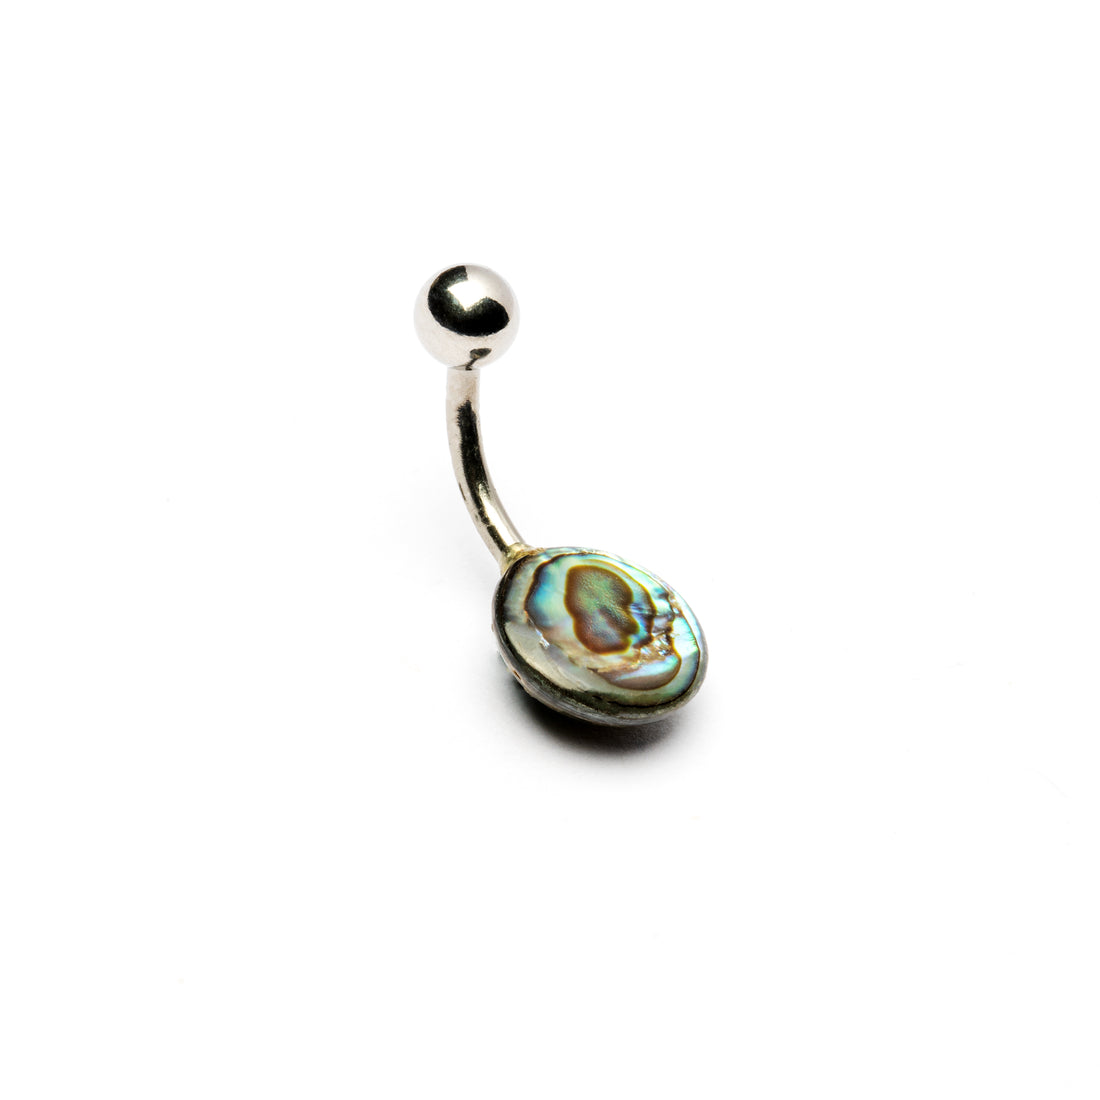 Abalone Shell Belly Piercing on a surgical steel bar right side view